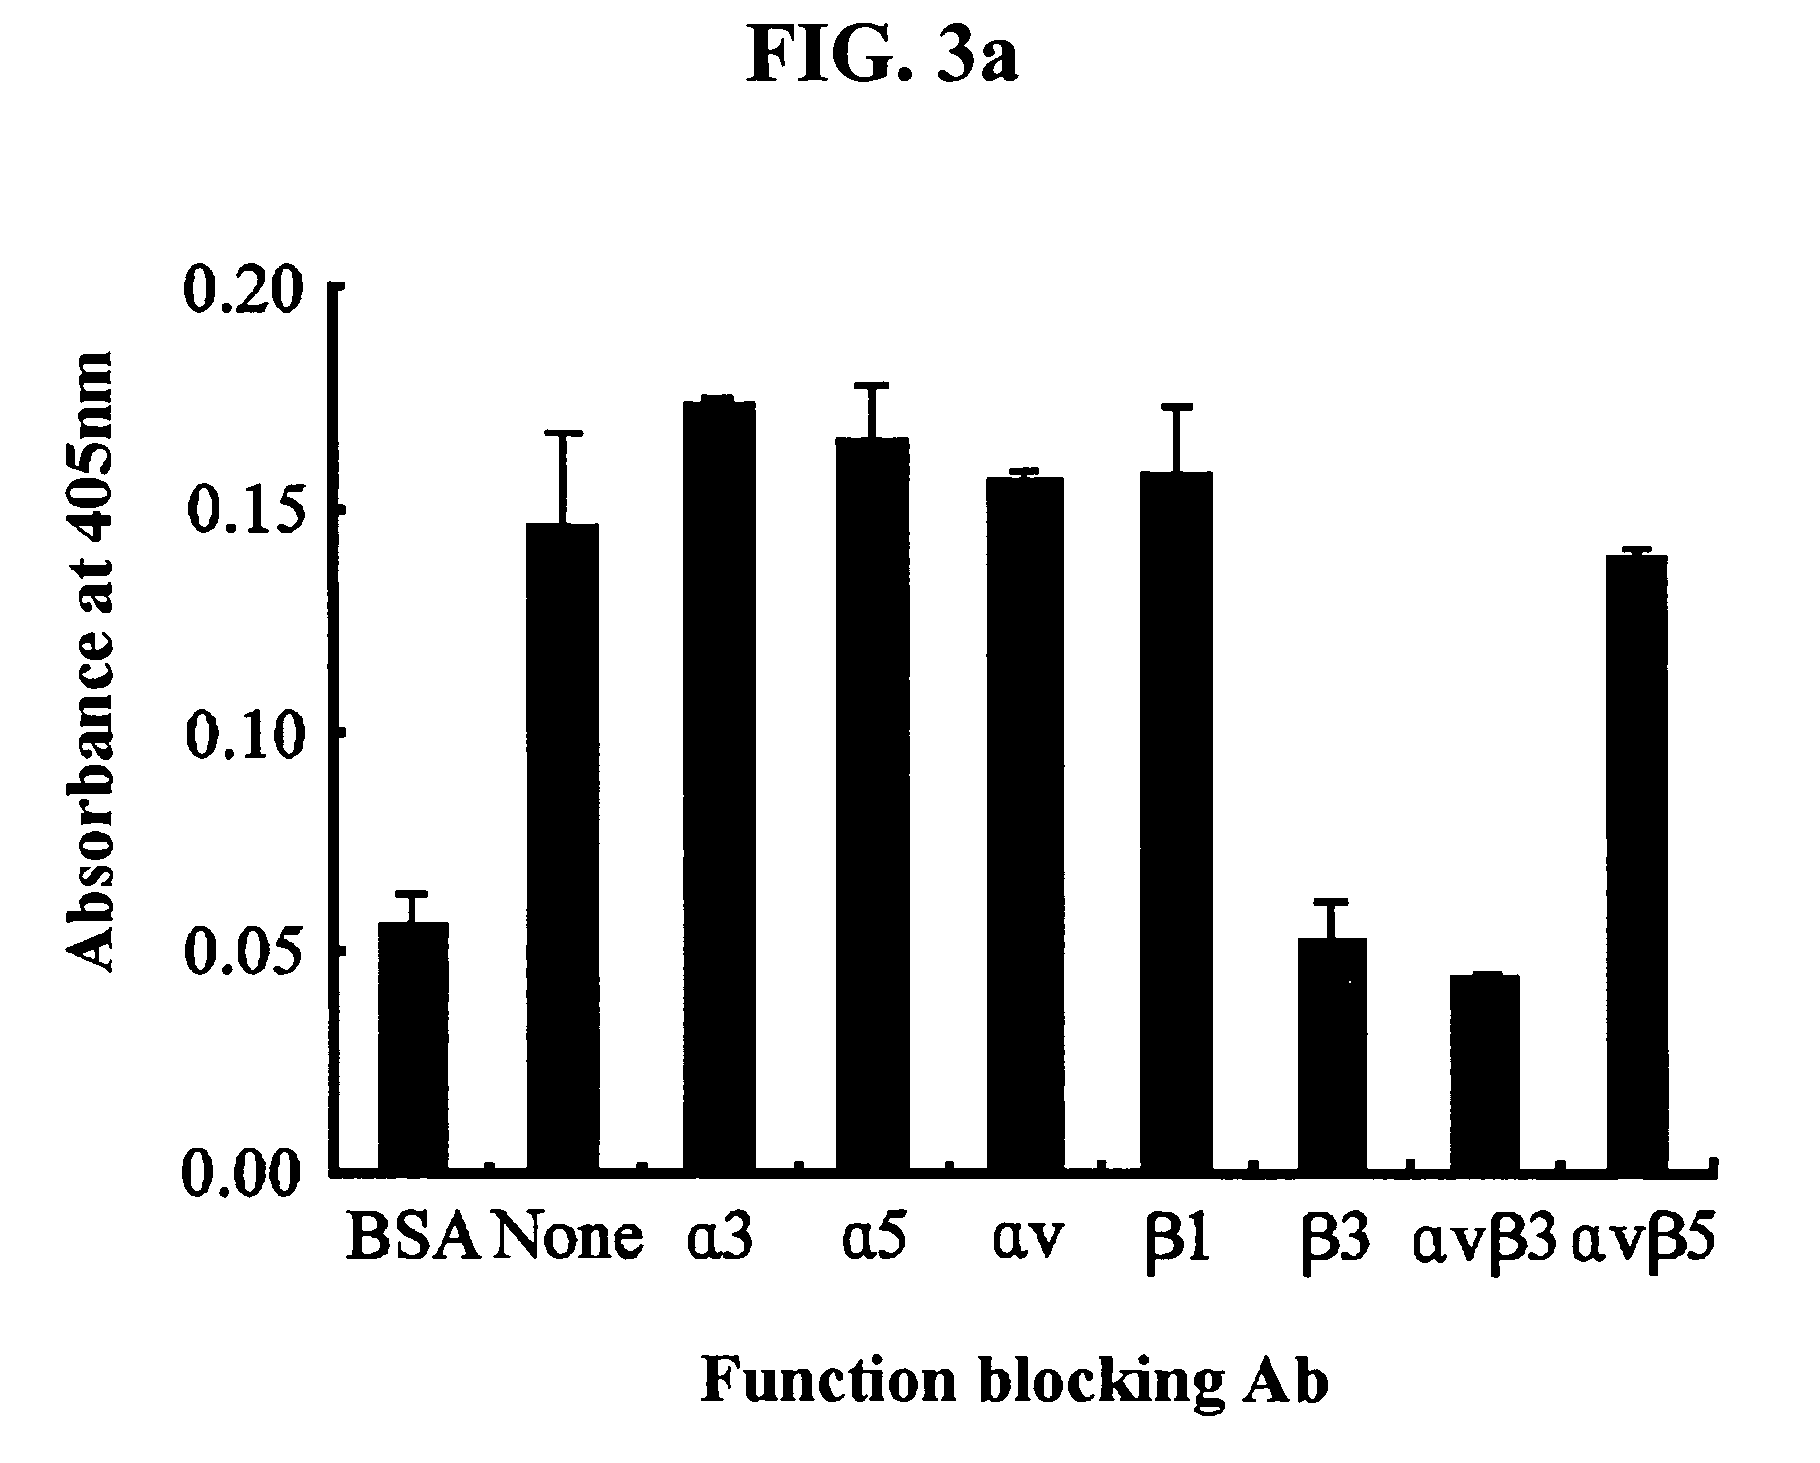 Use of a peptide that interacts with αvβ3 integrin of endothelial cell